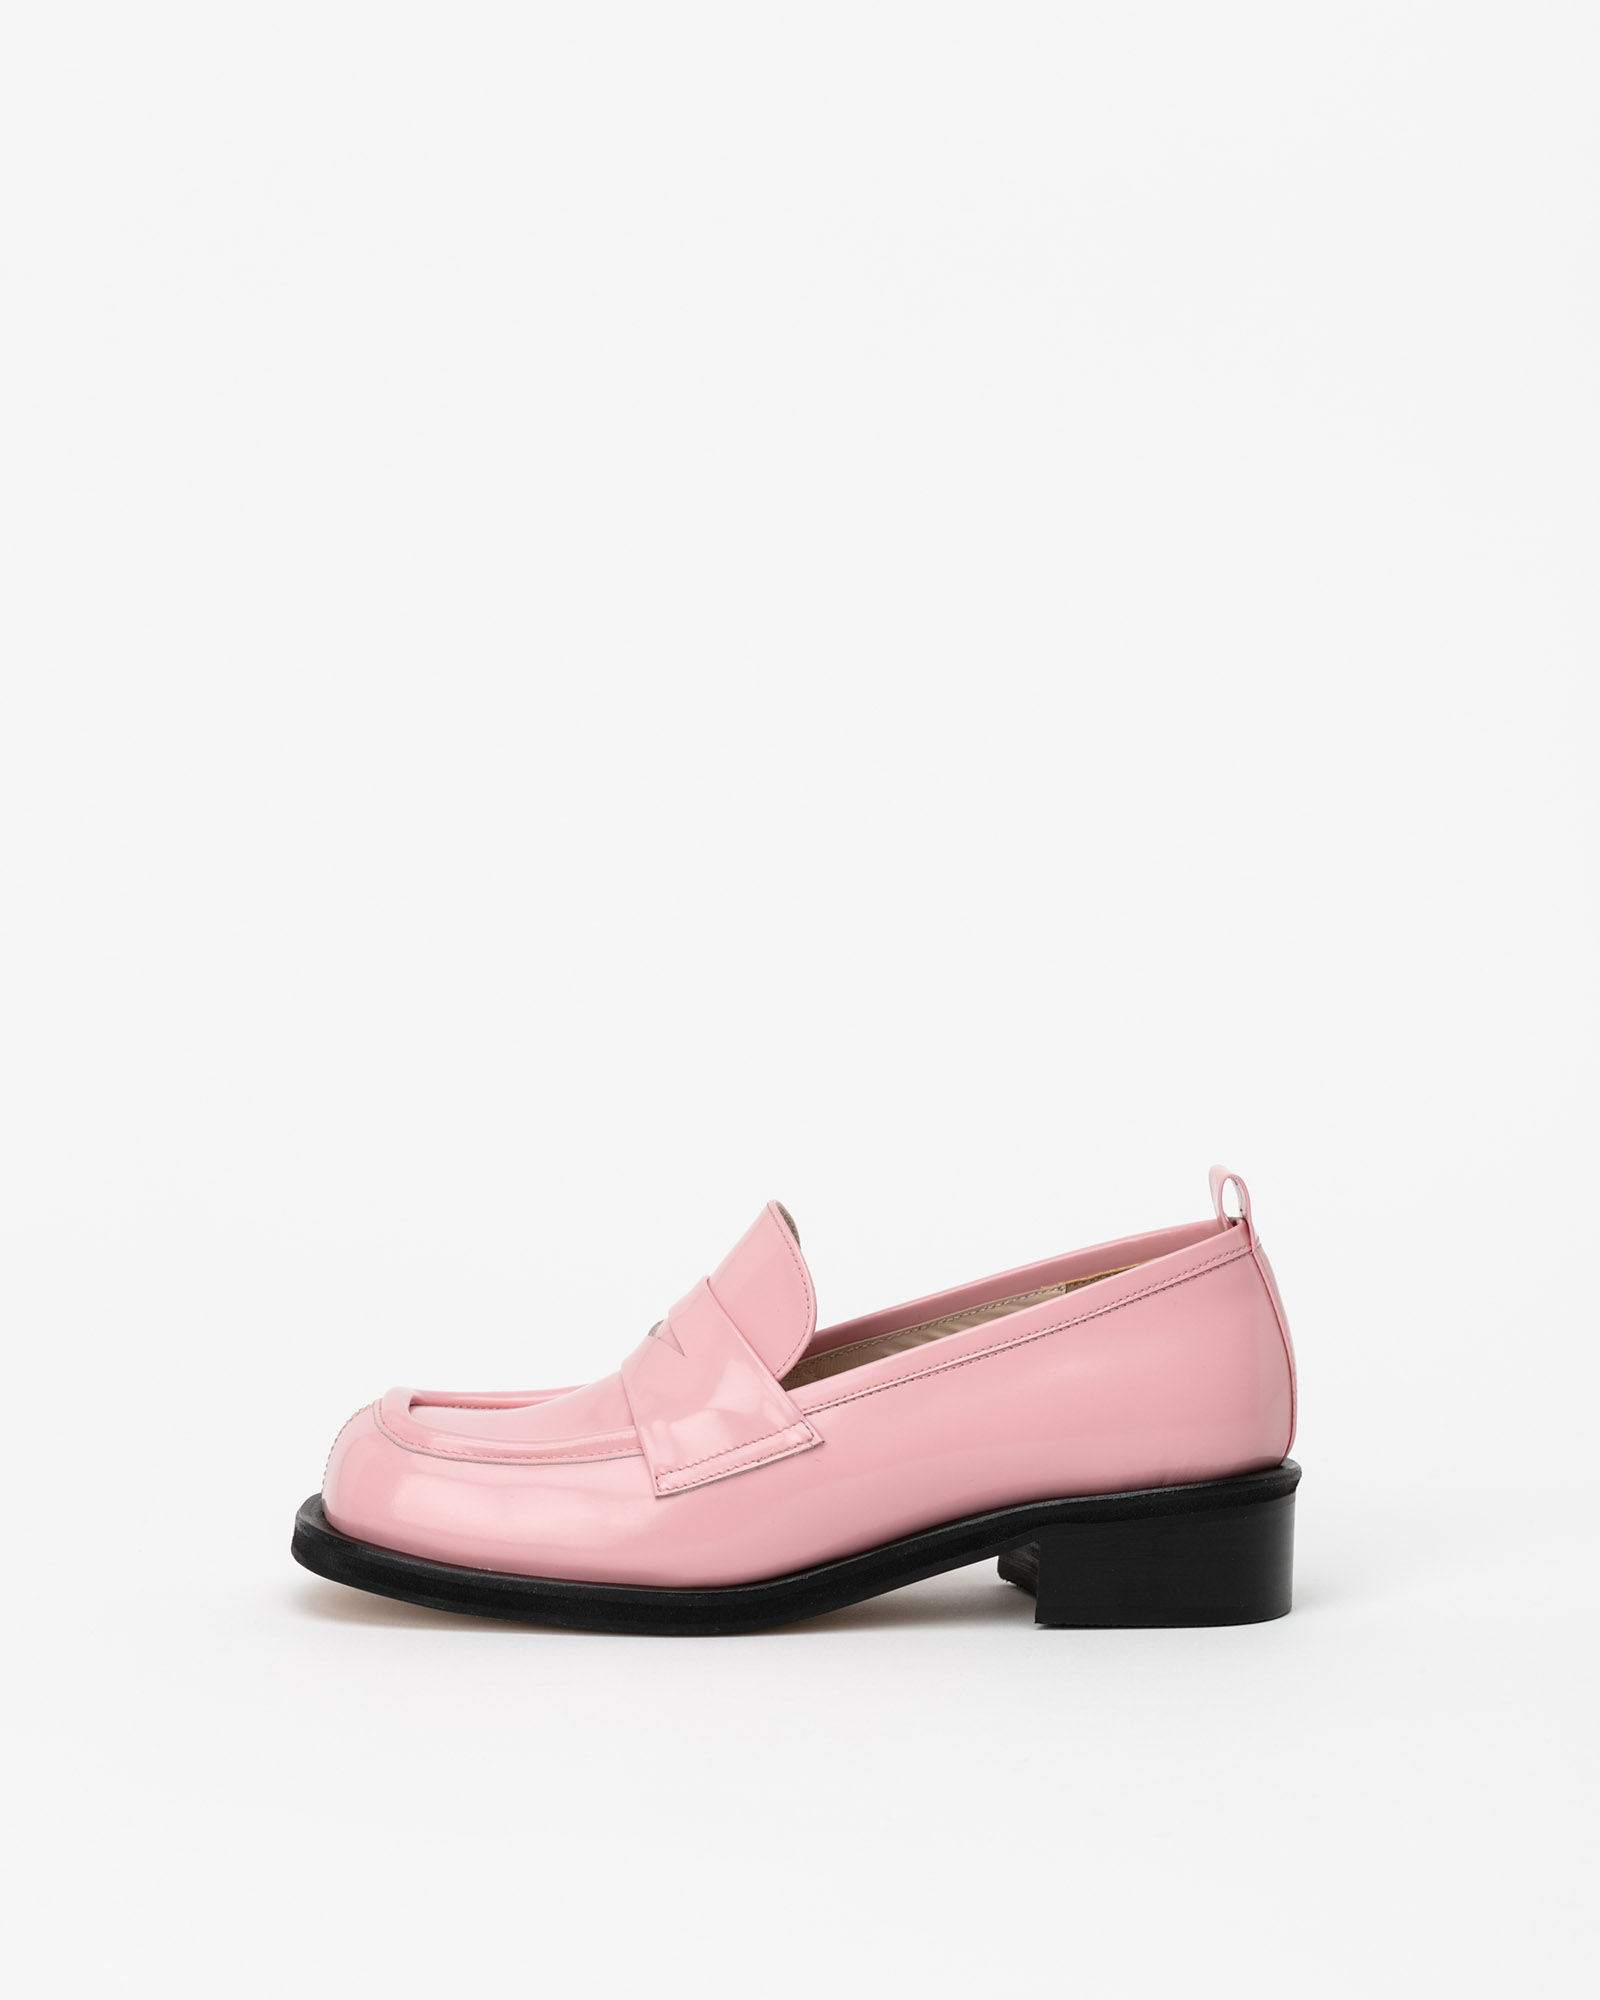 Madrigalo Loafers in Quartz Pink Box